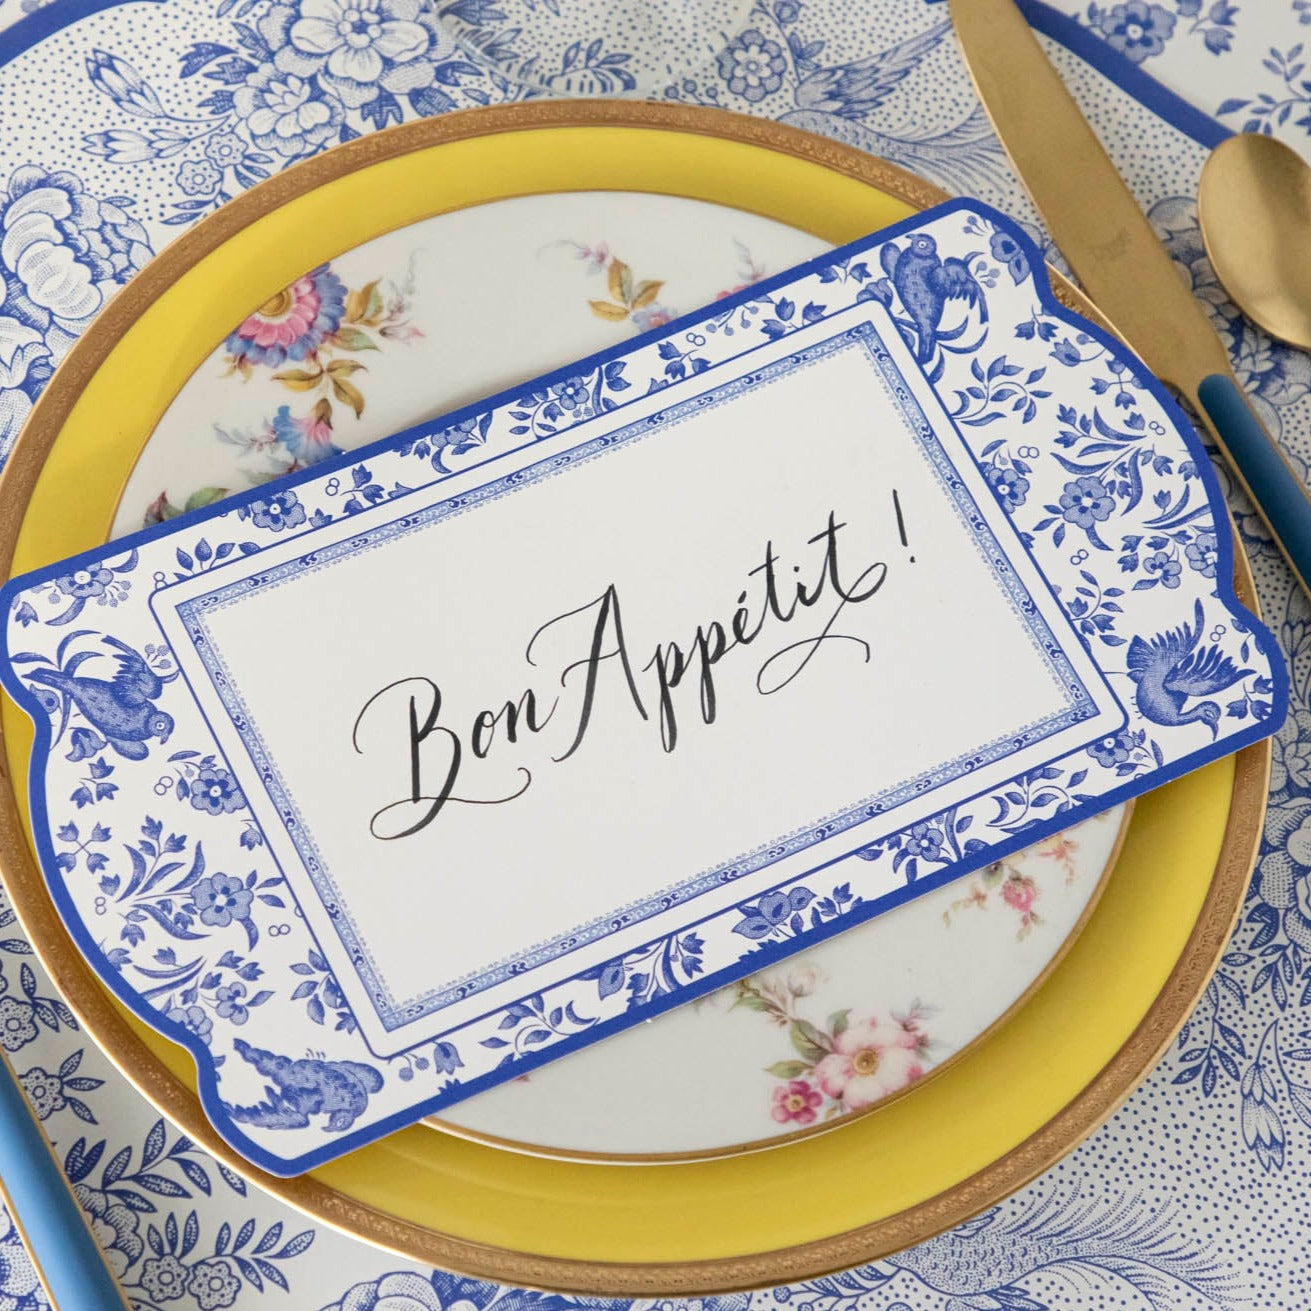 An elegant blue and white place setting featuring a Blue Regal Peacock Table Card with &quot;Bon Appetit&quot; written on it in beautiful cursive resting on the plate.